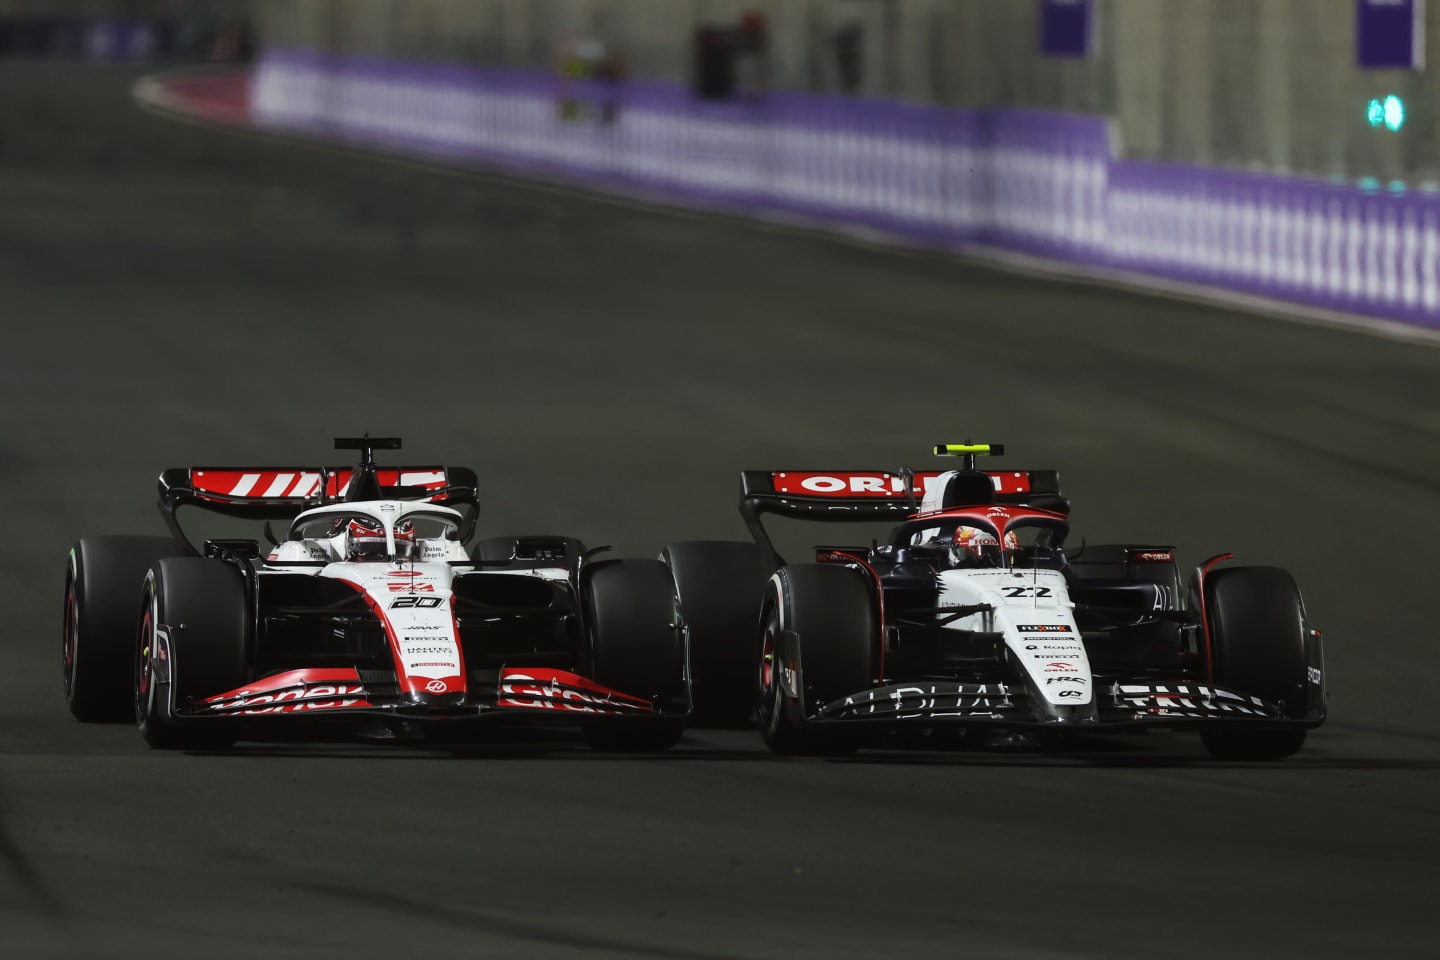 JEDDAH, SAUDI ARABIA - MARCH 19: Yuki Tsunoda of Japan driving the (22) Scuderia AlphaTauri AT04 leads Kevin Magnussen of Denmark driving the (20) Haas F1 VF-23 Ferrari during the F1 Grand Prix of Saudi Arabia at Jeddah Corniche Circuit on March 19, 2023 in Jeddah, Saudi Arabia. (Photo by Lars Baron/Getty Images)